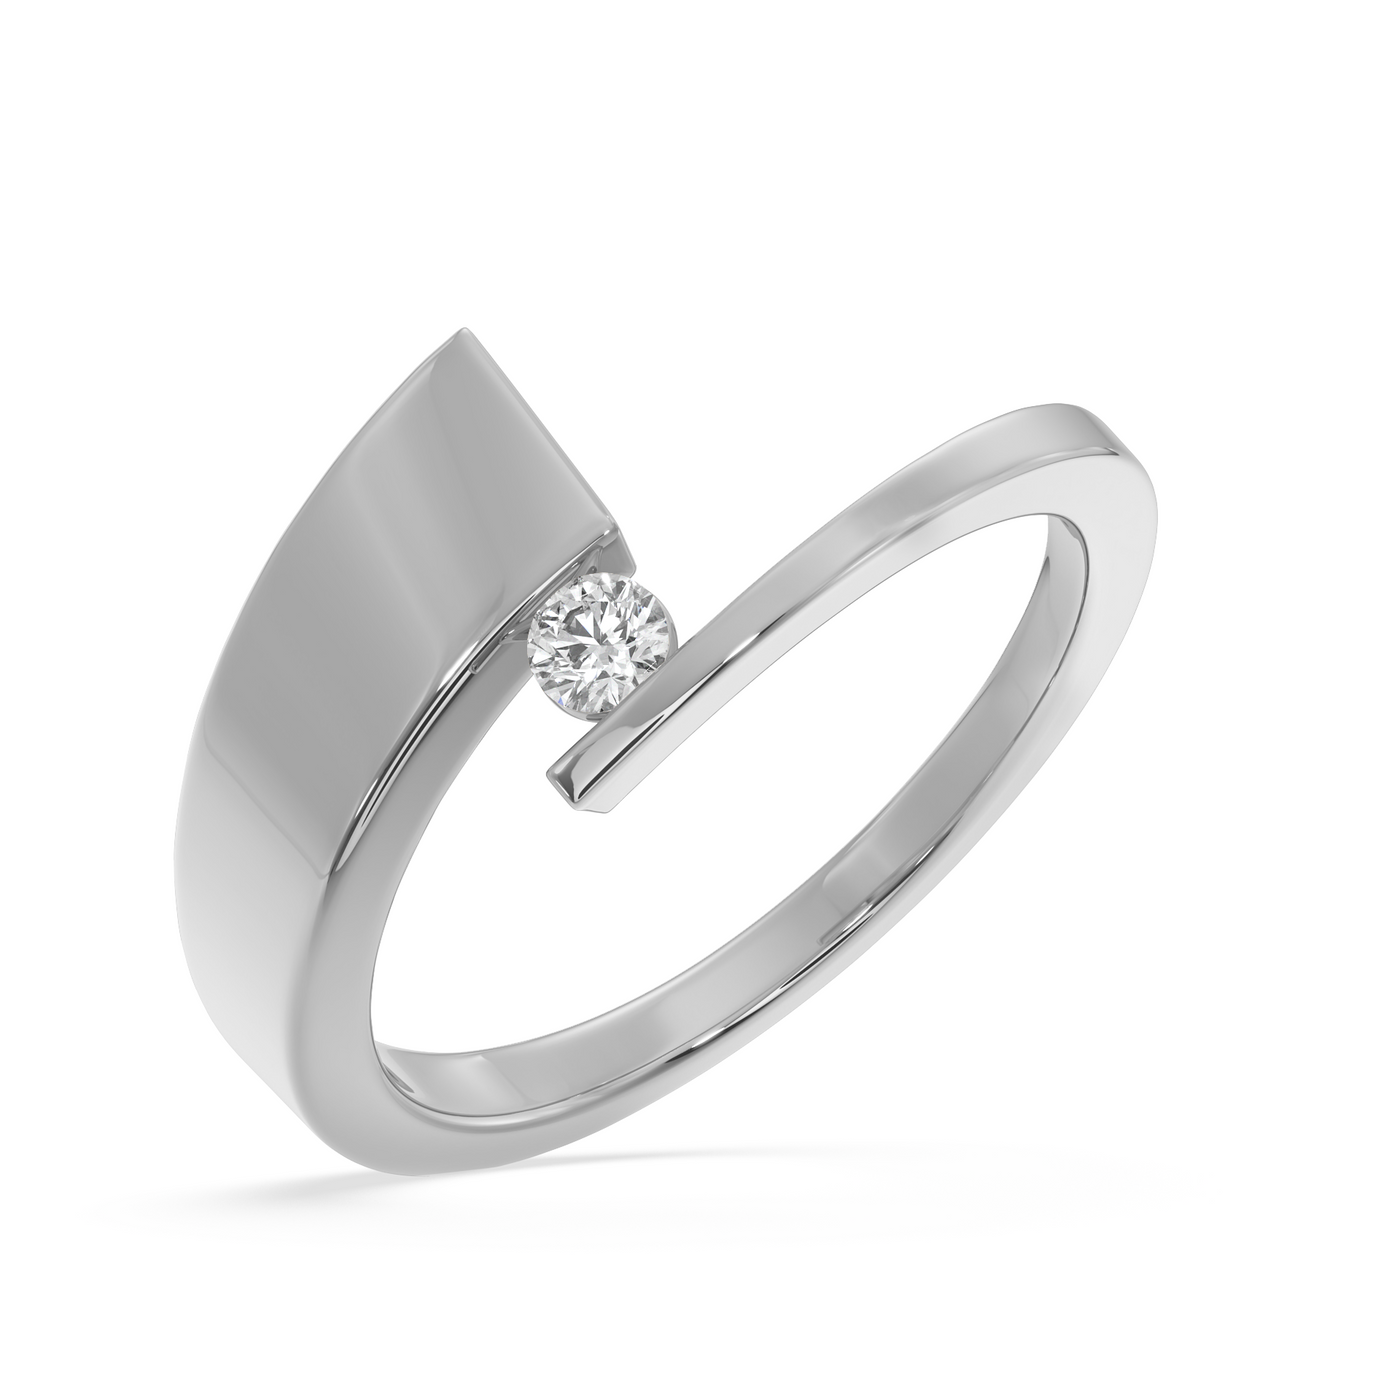 SY Women's Ring in Platinum, Minimal Solitaire